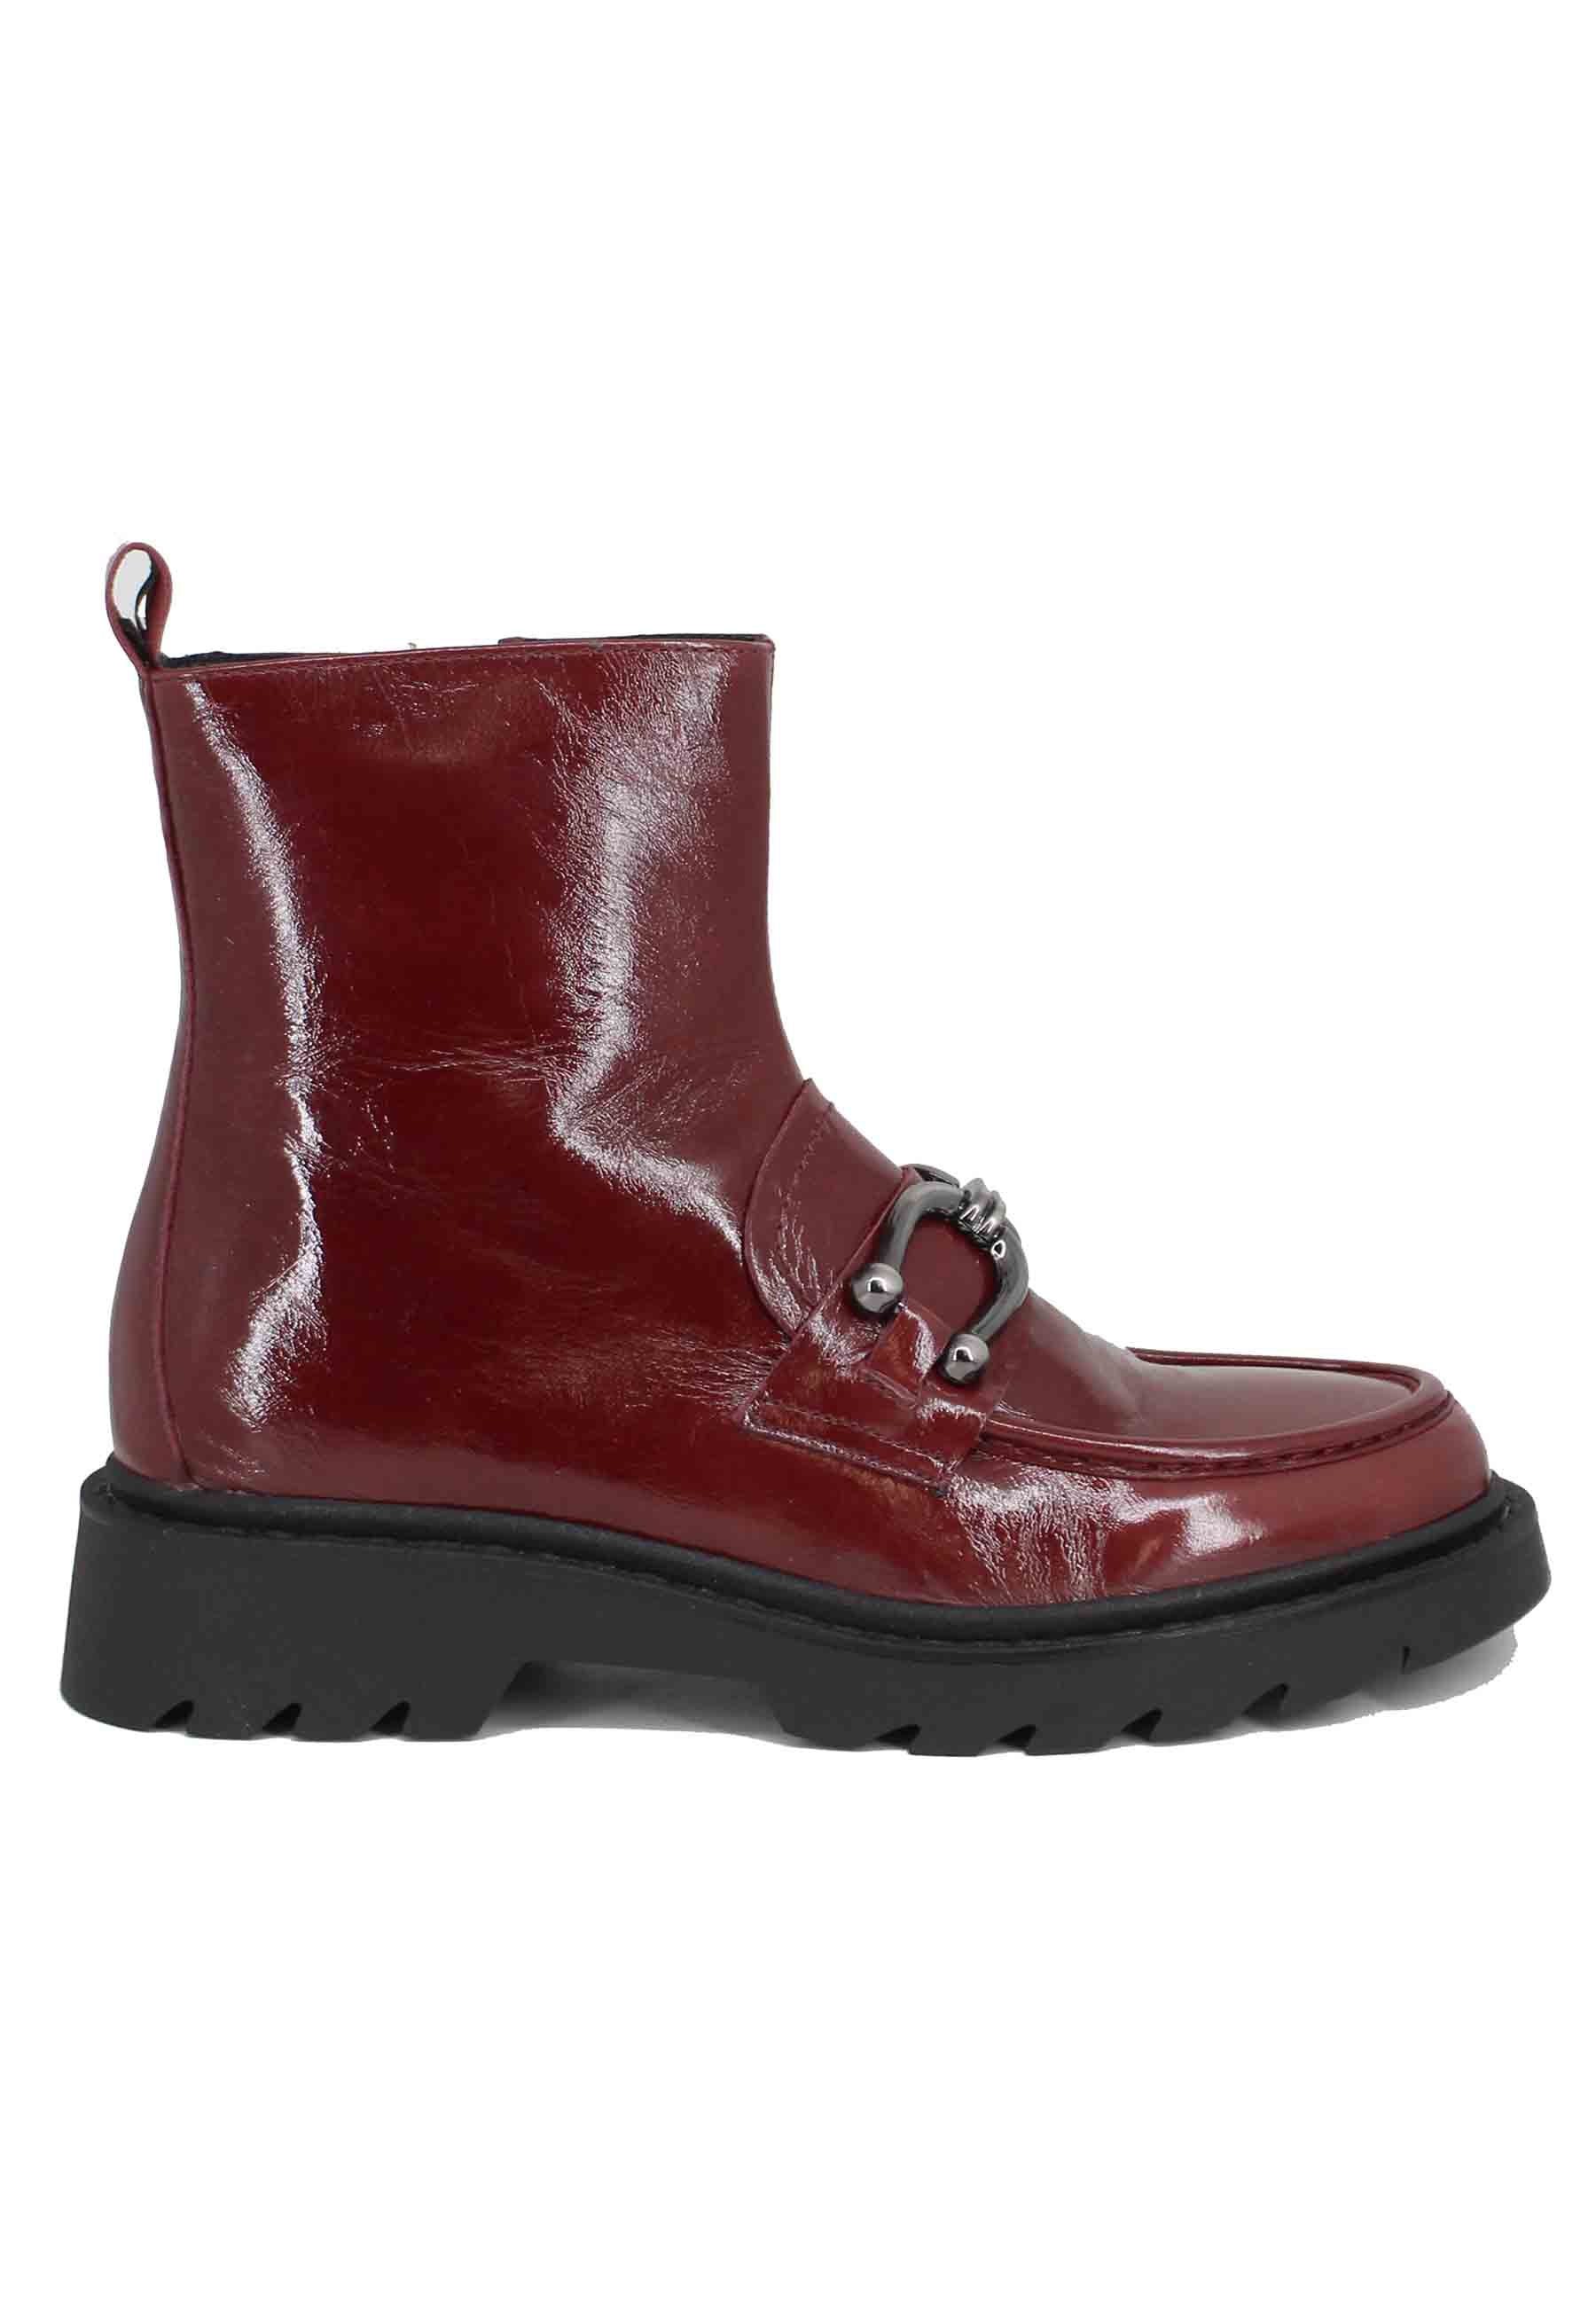 Women's burgundy patent leather ankle boots with lug sole